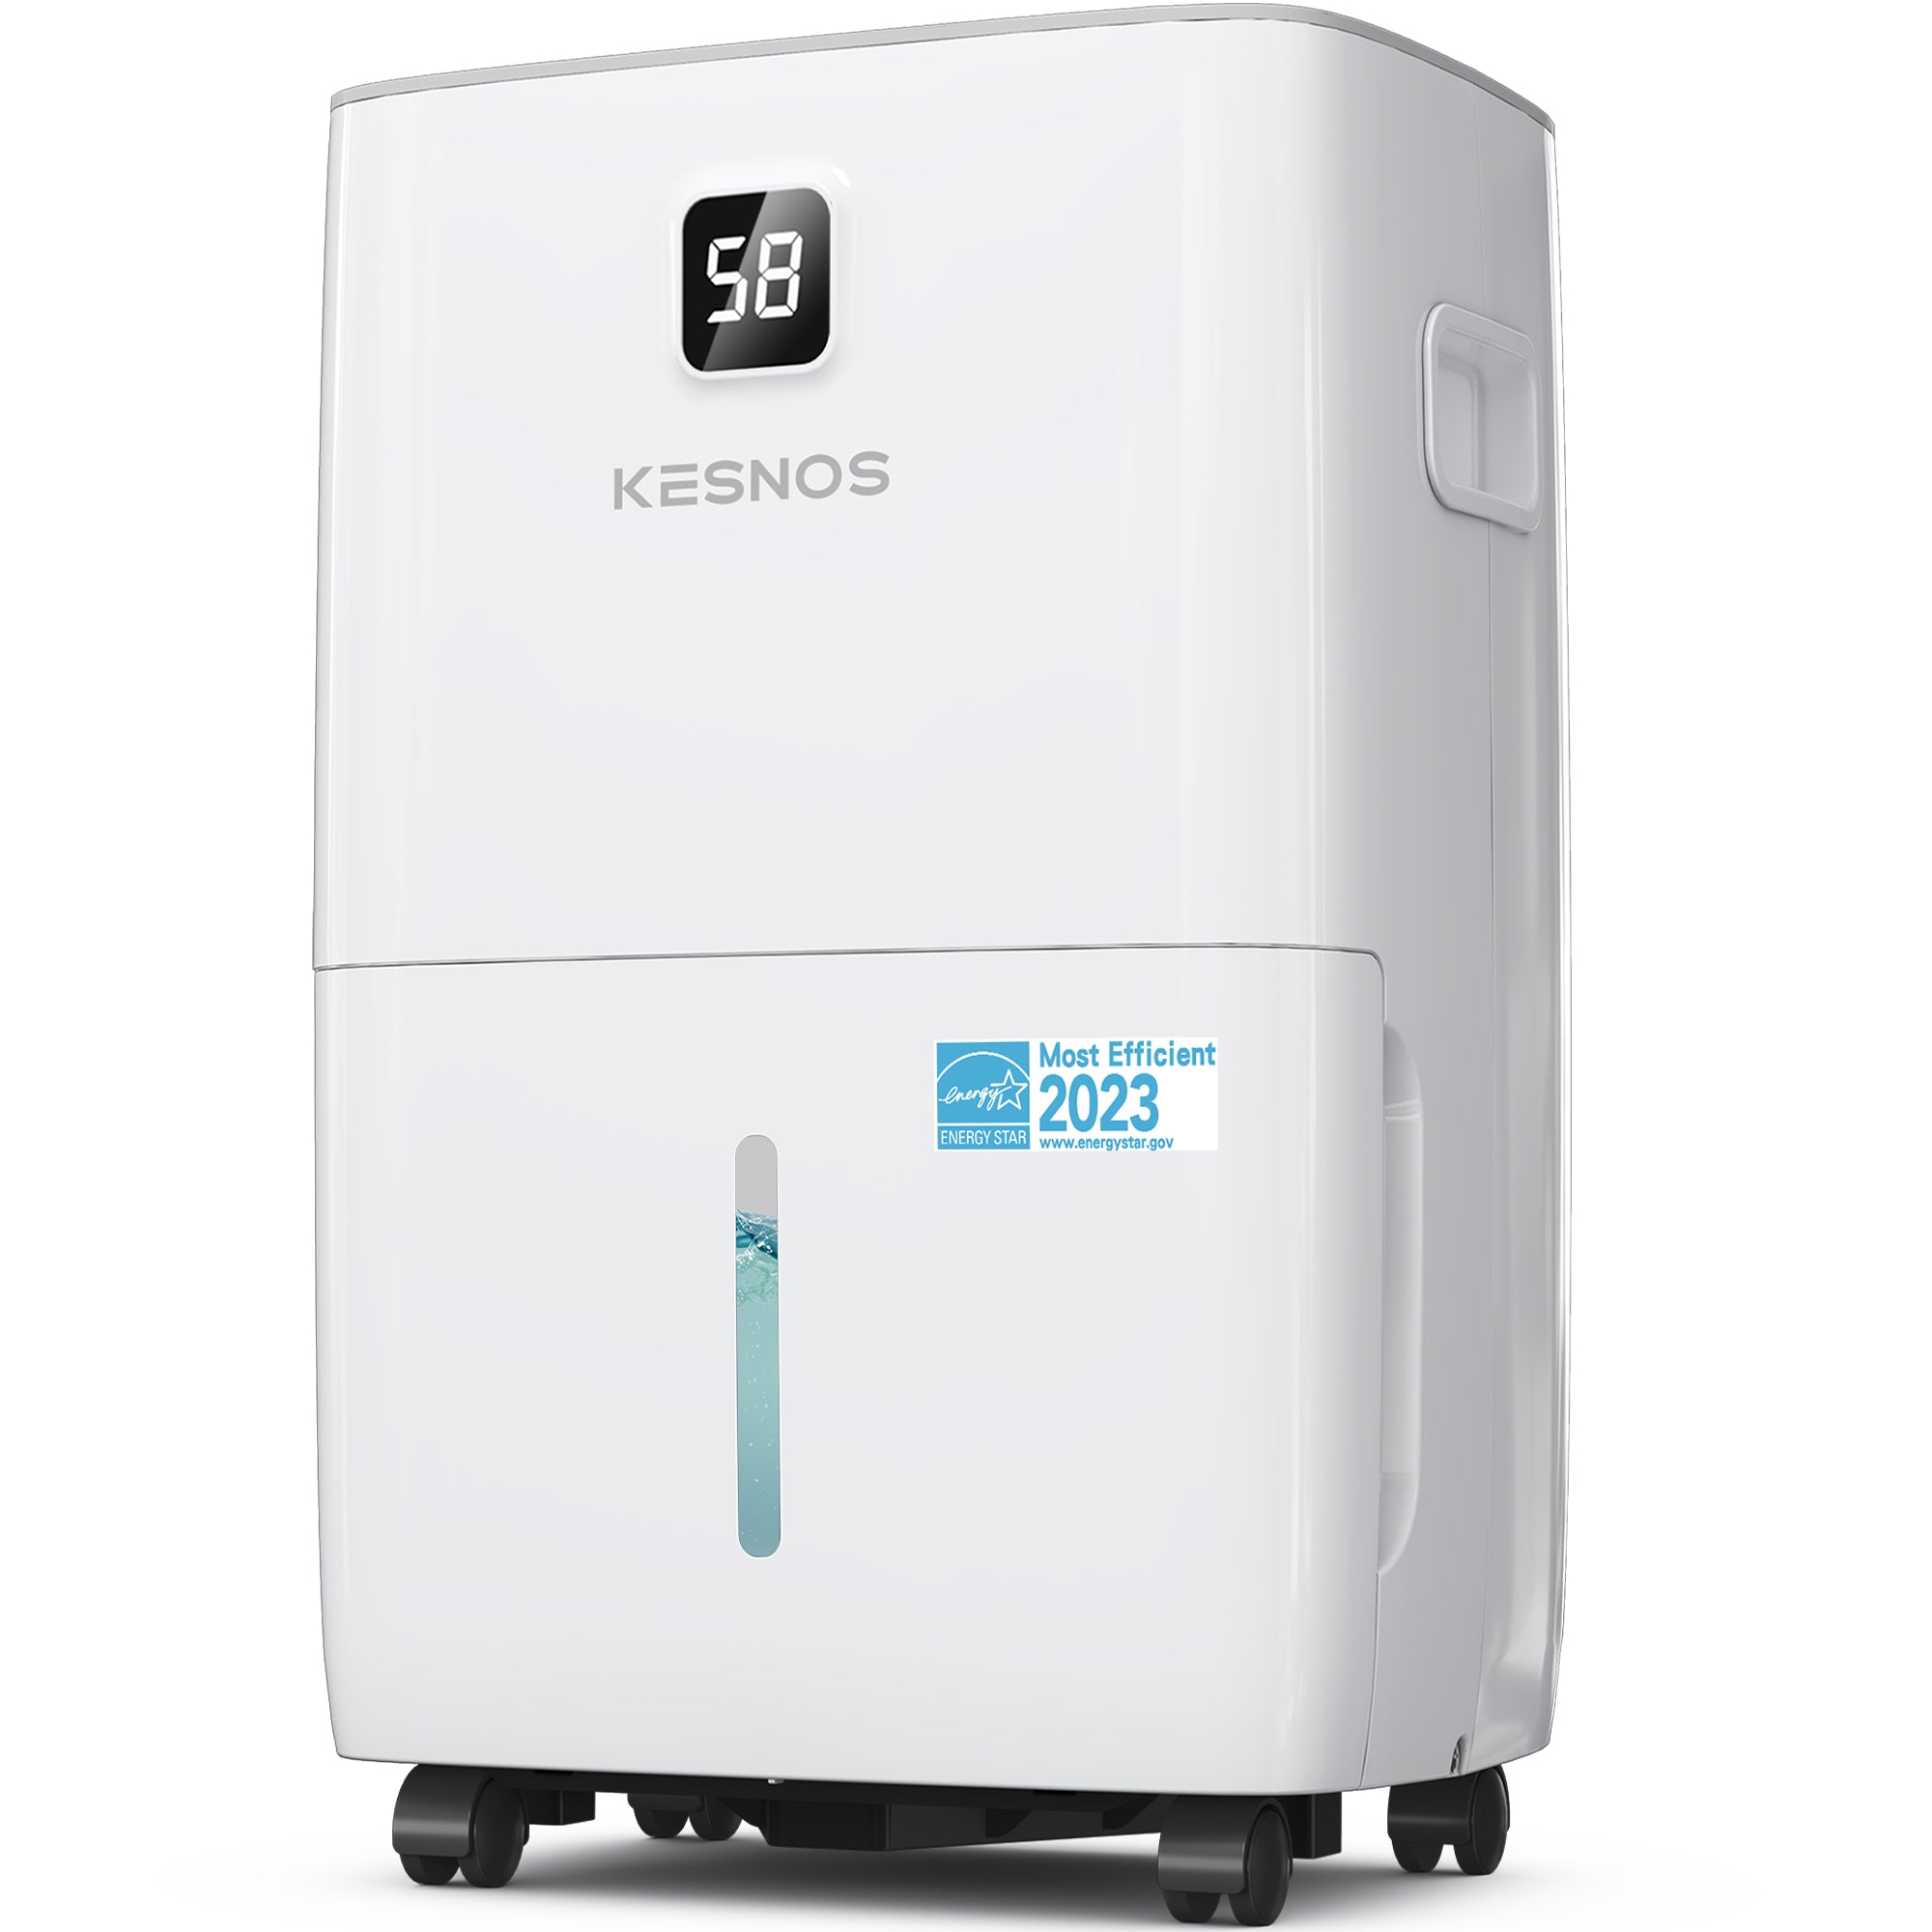 Kesnos 80 Pints Home Dehumidifier Energy Star Most Efficient 2023 for Space Up to 5500 Sq. Ft - Dehumidifier with Drain Hose for Basement, Home, Bathroom - Dehumidifier with Front Display (Model: JD025N-80)